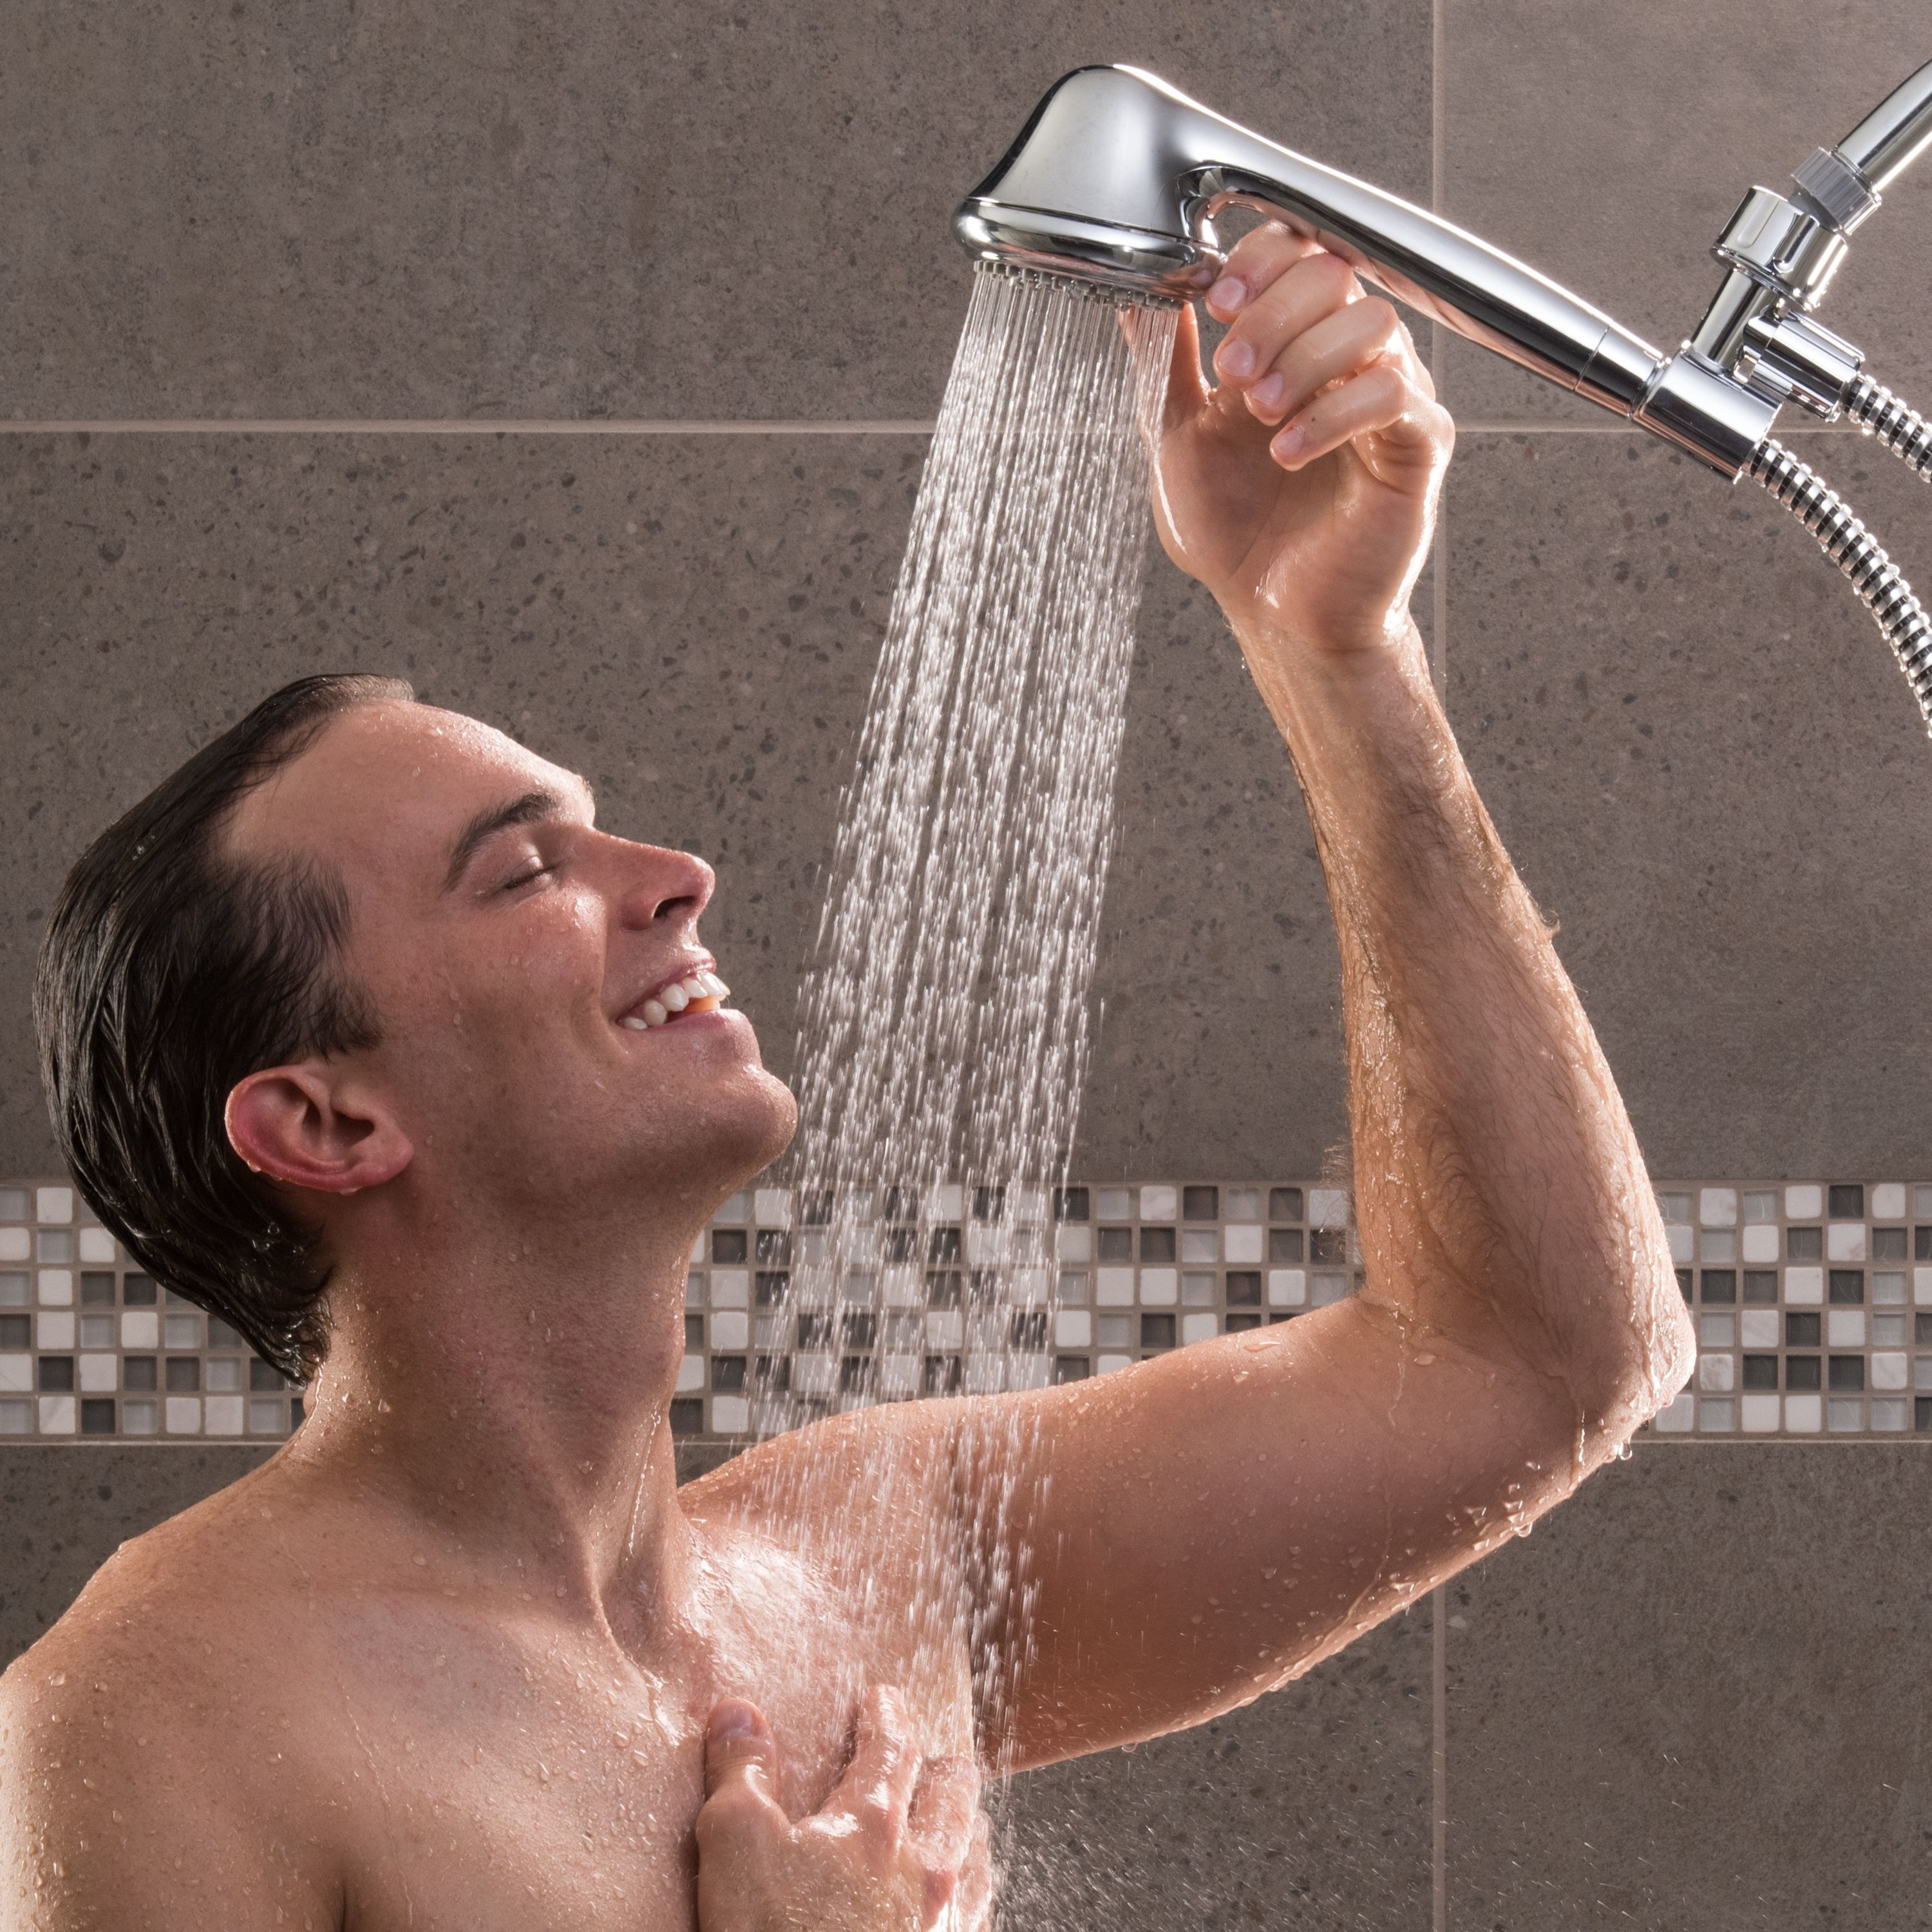 A model using the showerhead